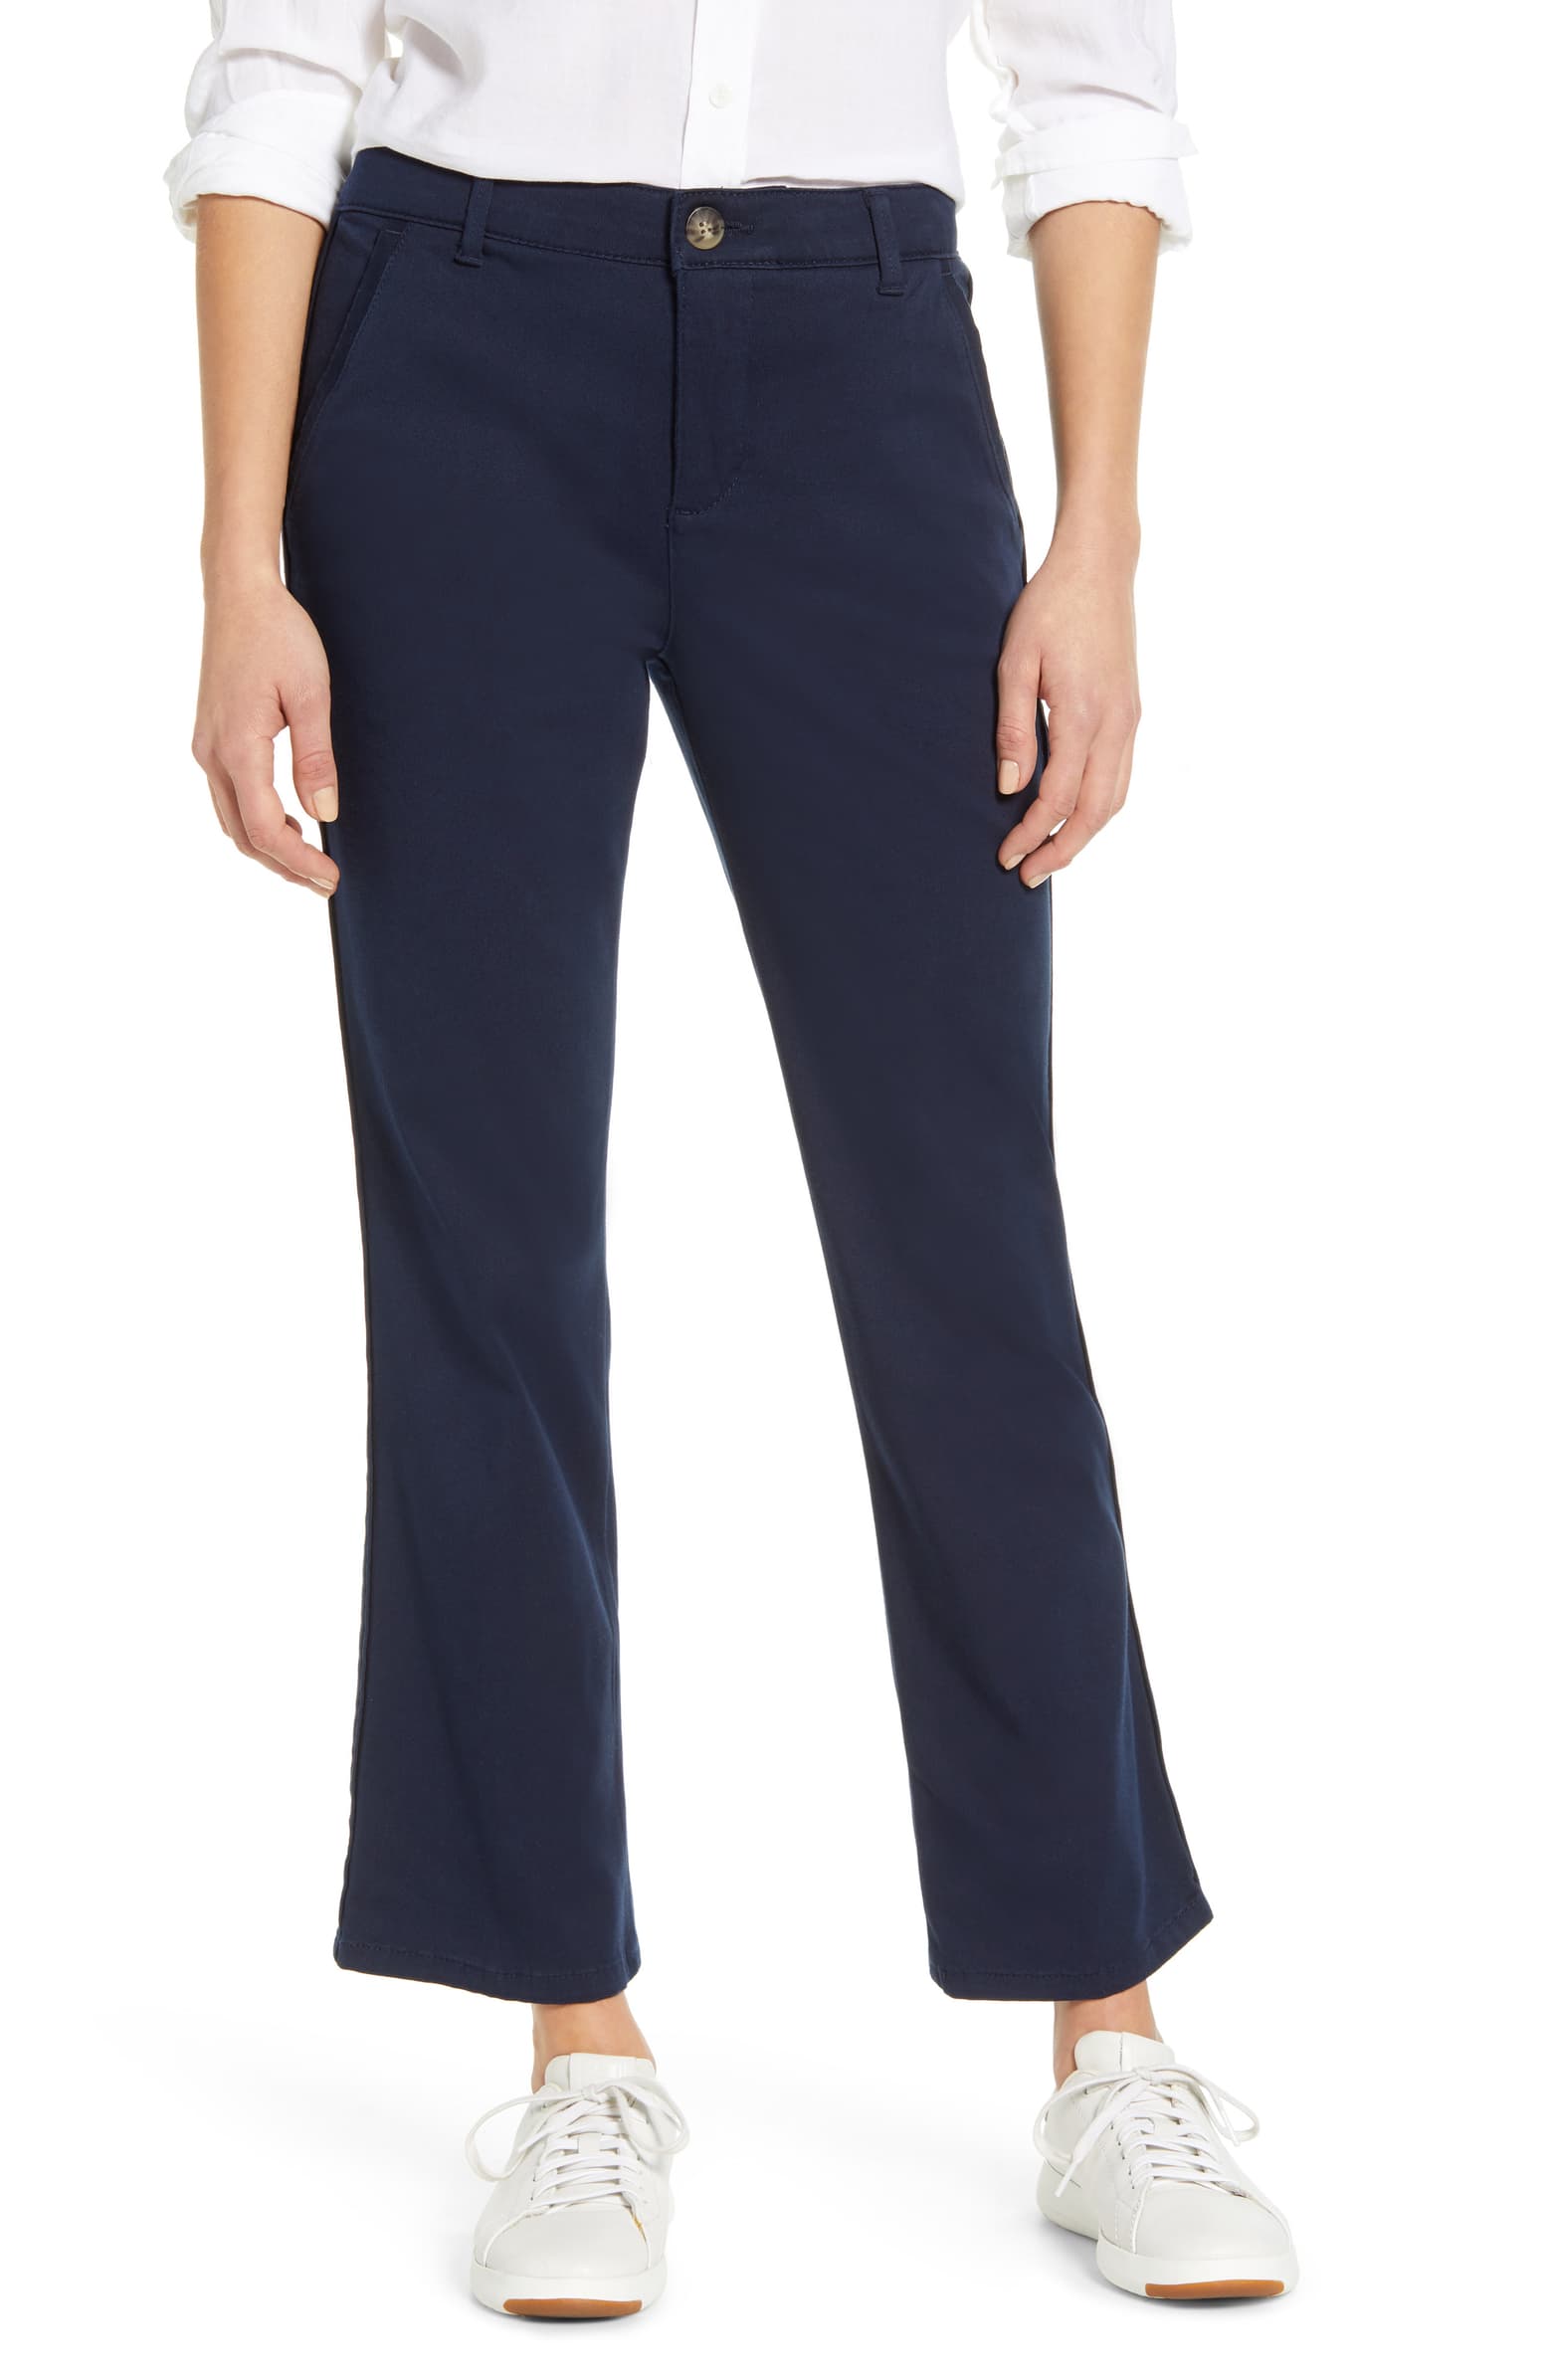 Nordstrom Shoppers Love These Pants Because They Slim Your Waist, Hold ...